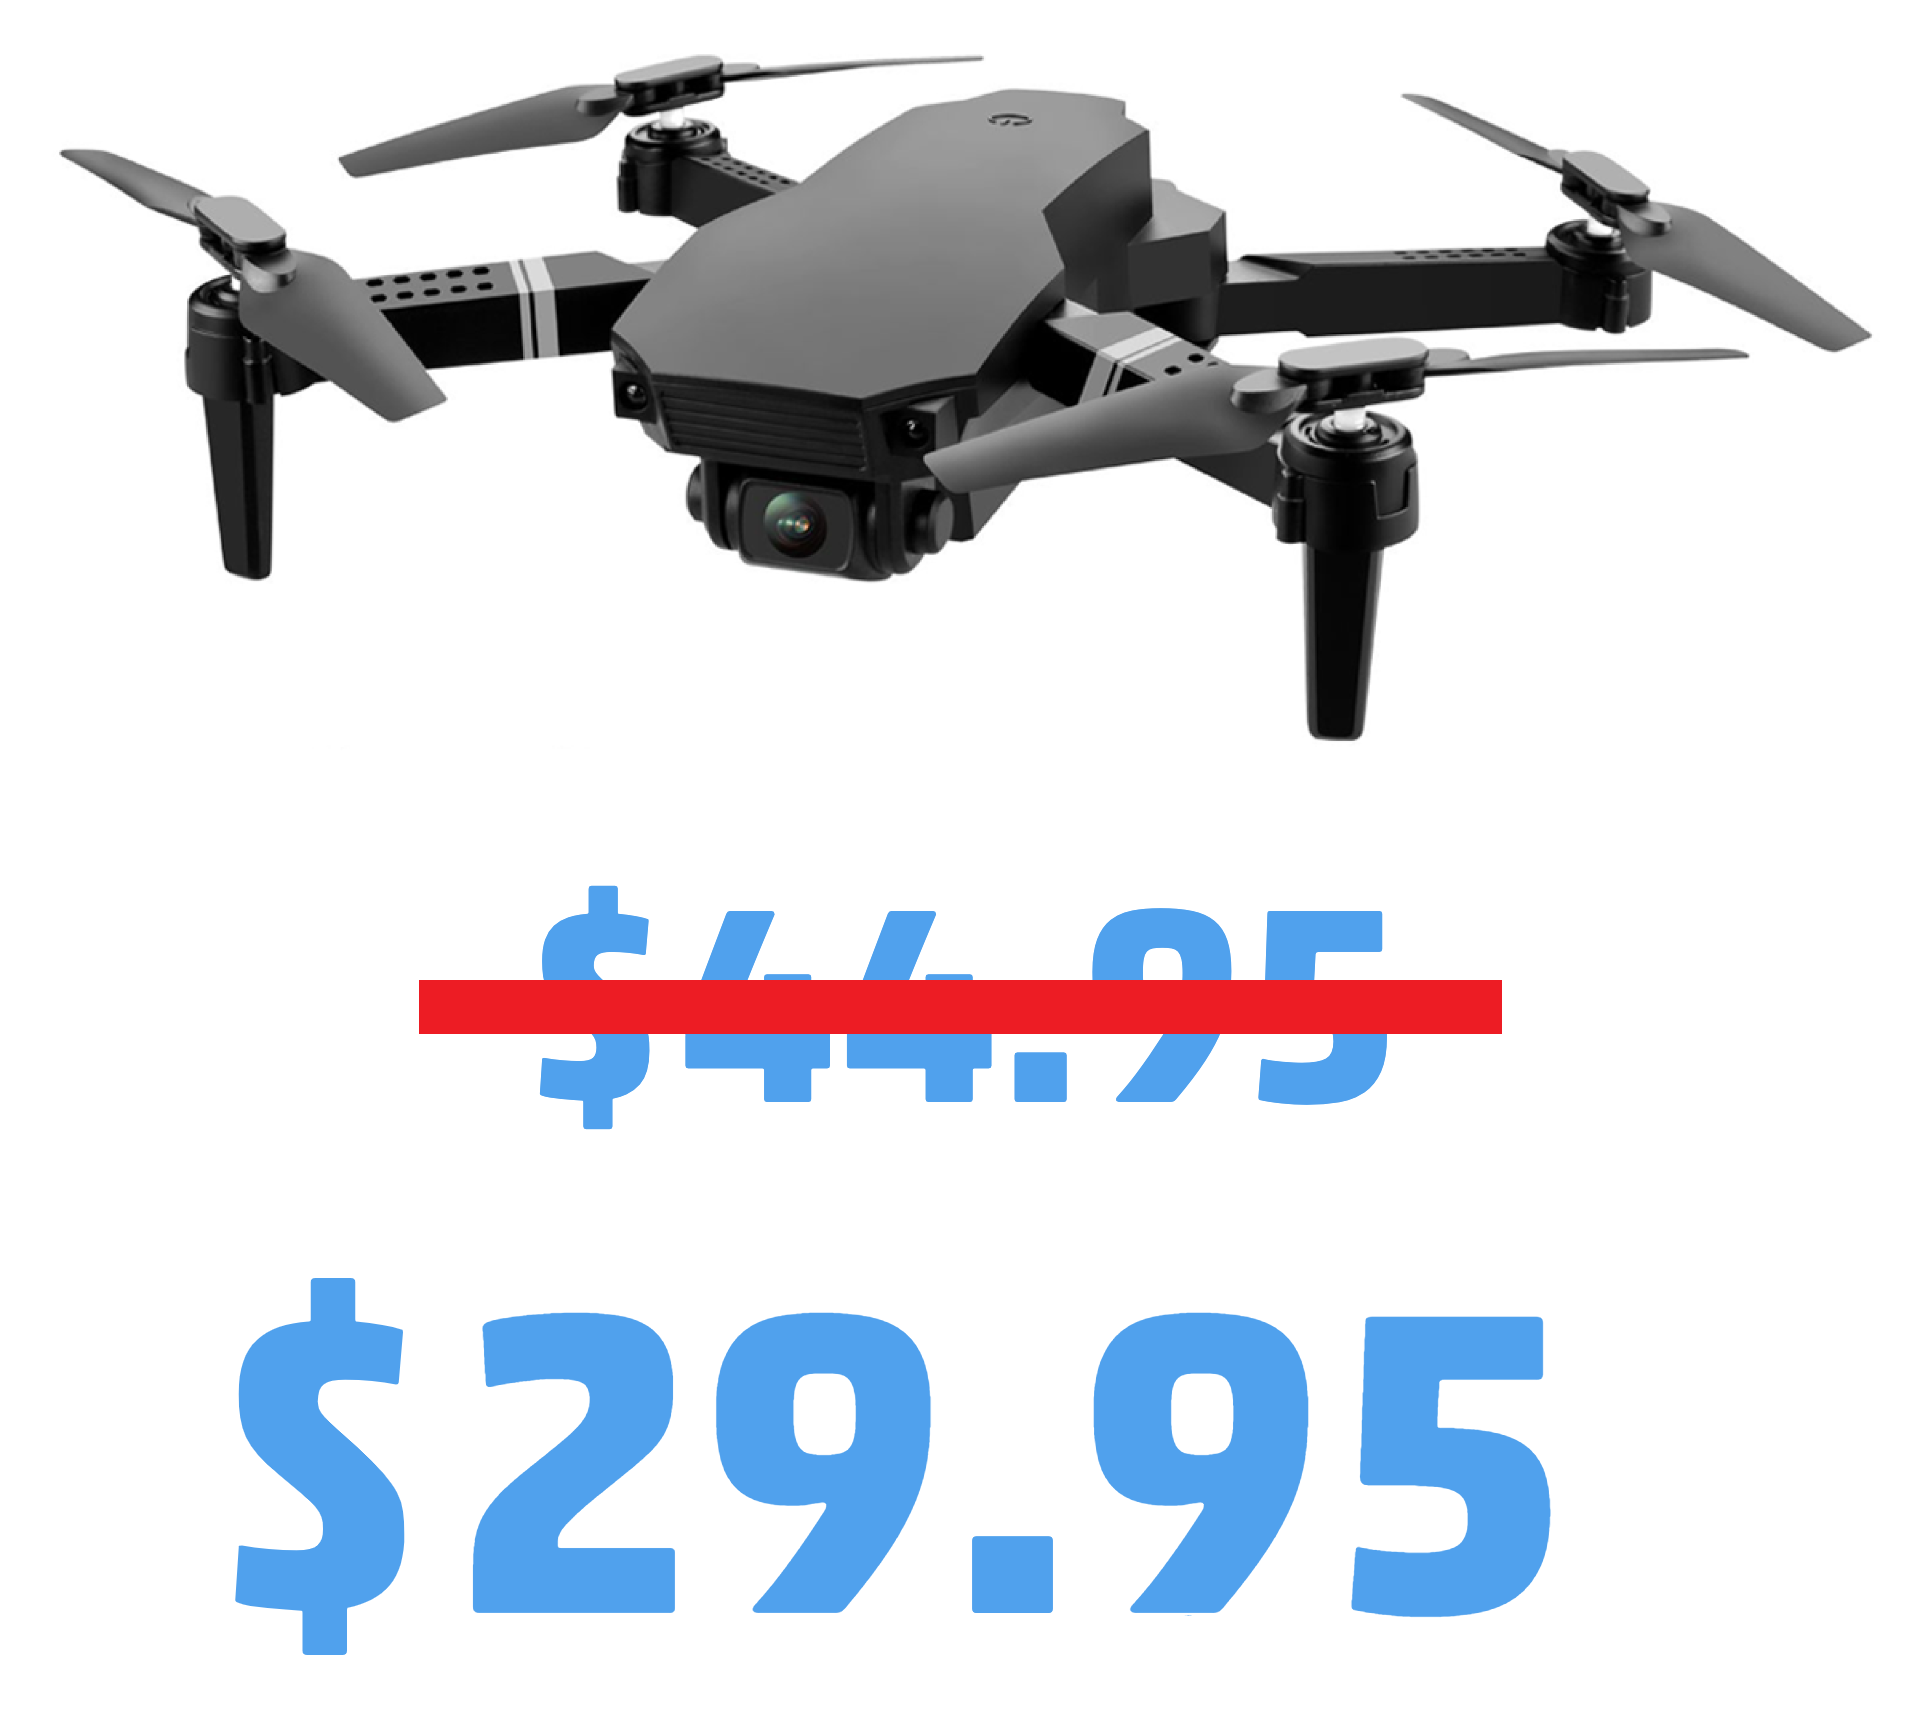 Quadcopter Drone (Includes Free Accessories)